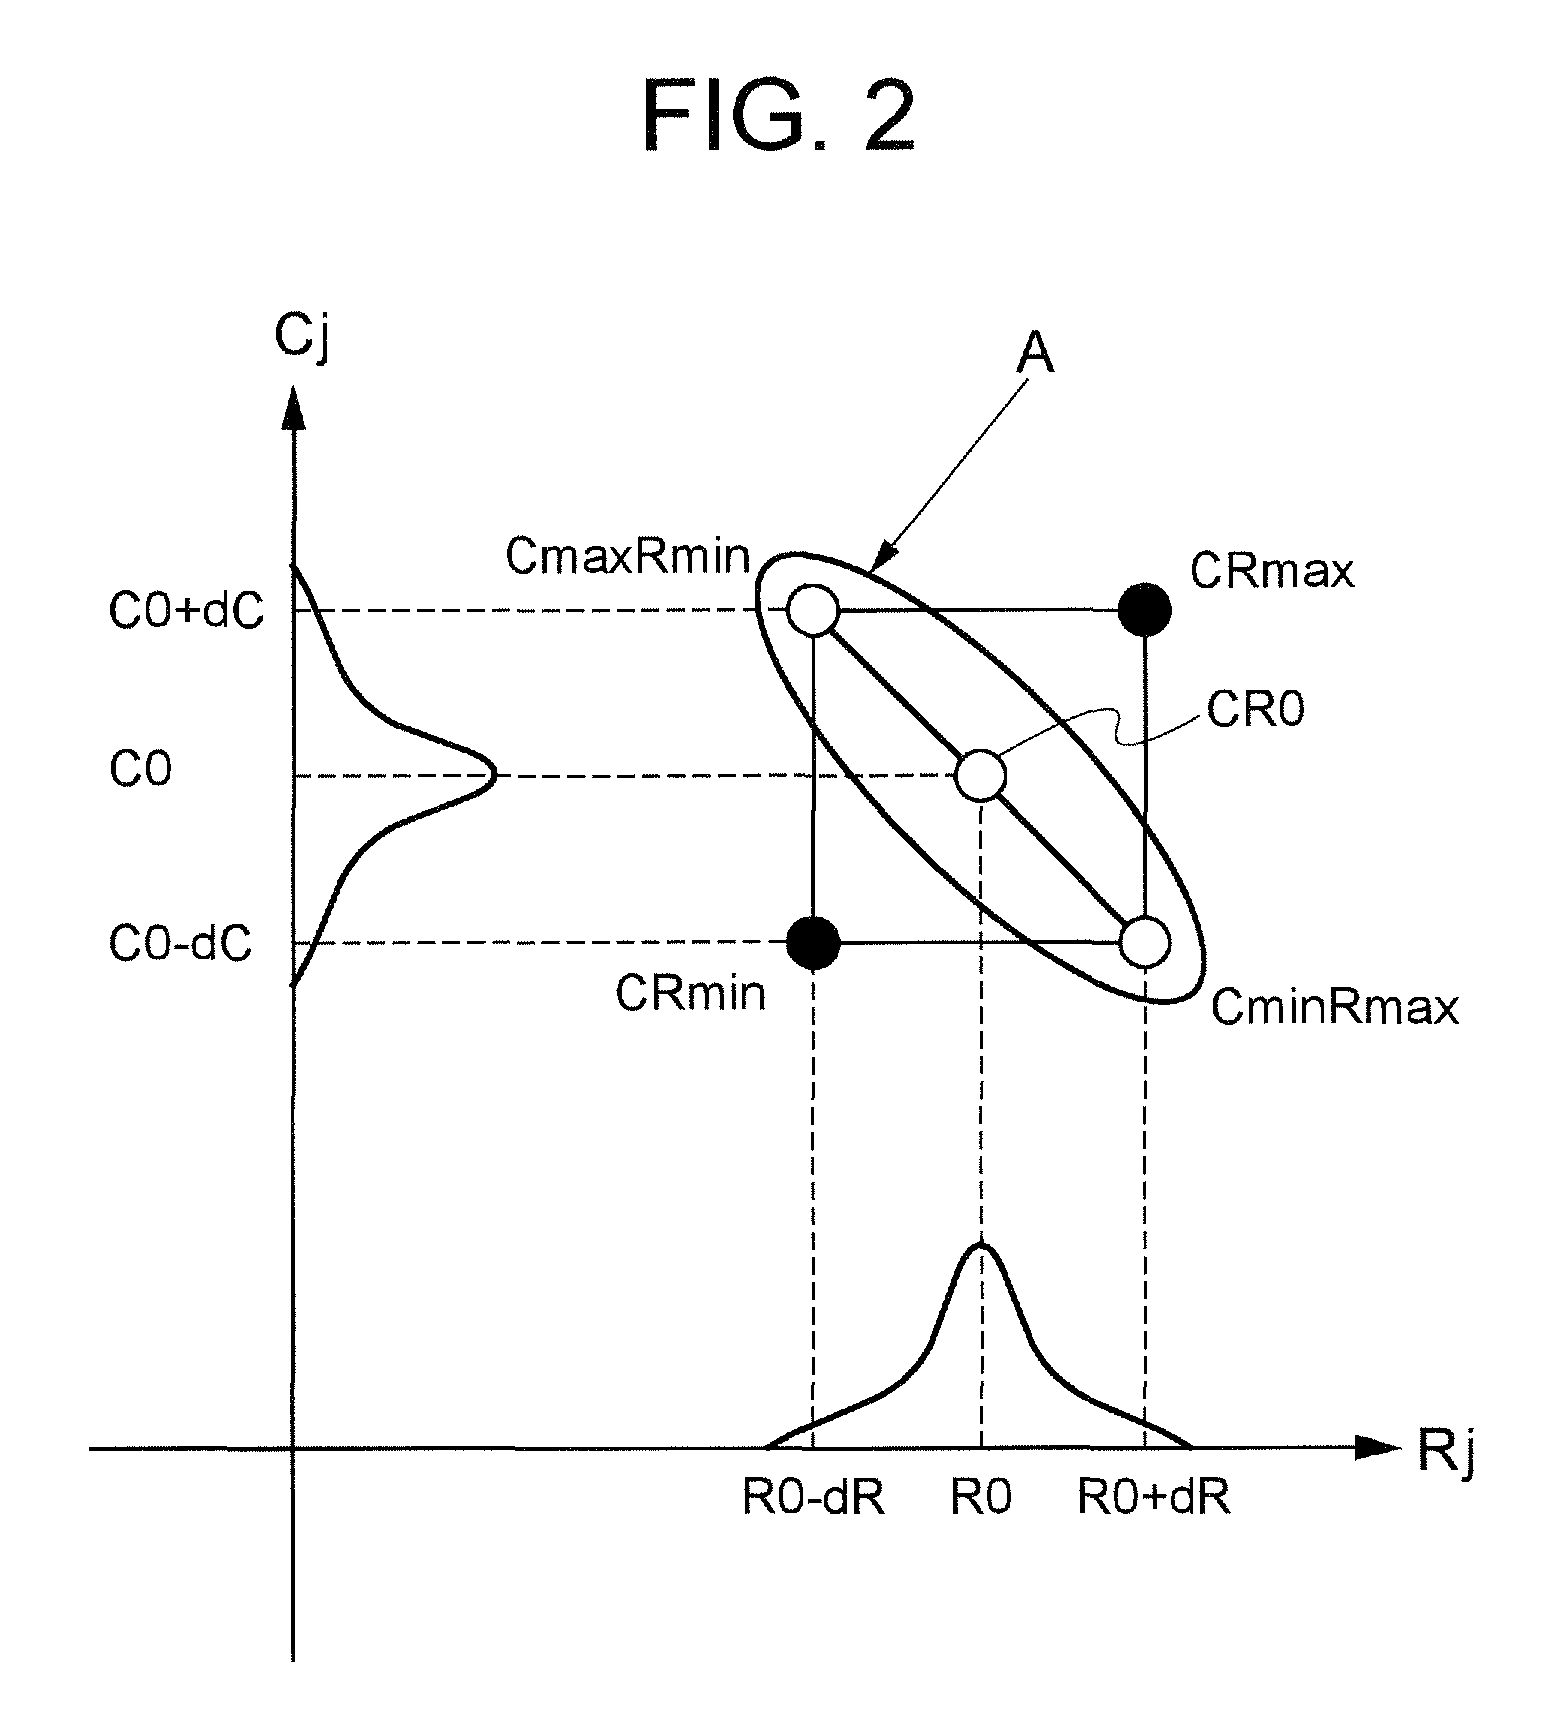 Operation timing verifying apparatus and program